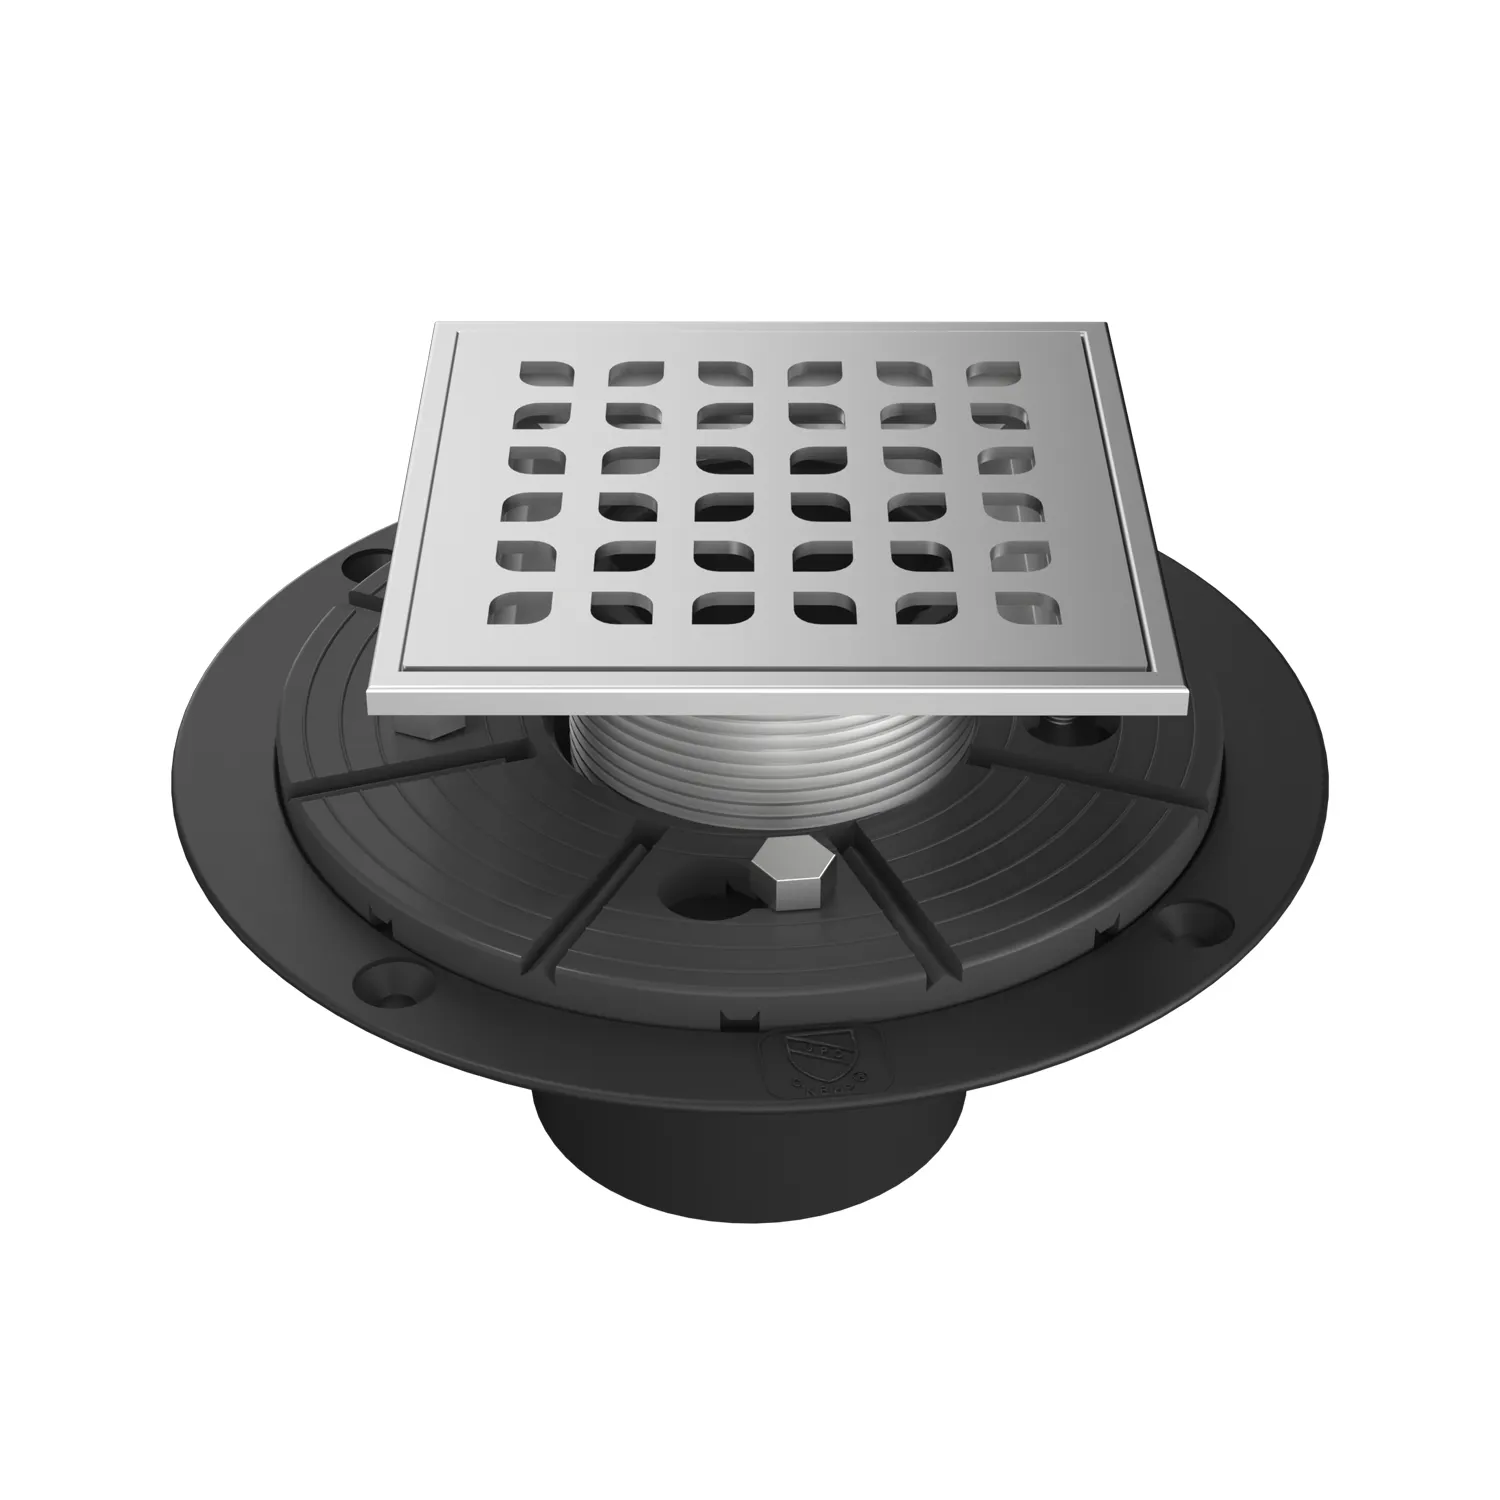 CUPC Certified 304 Stainless Steel Vertical Outlet Removable Cover Grate Square Shower Floor Drain